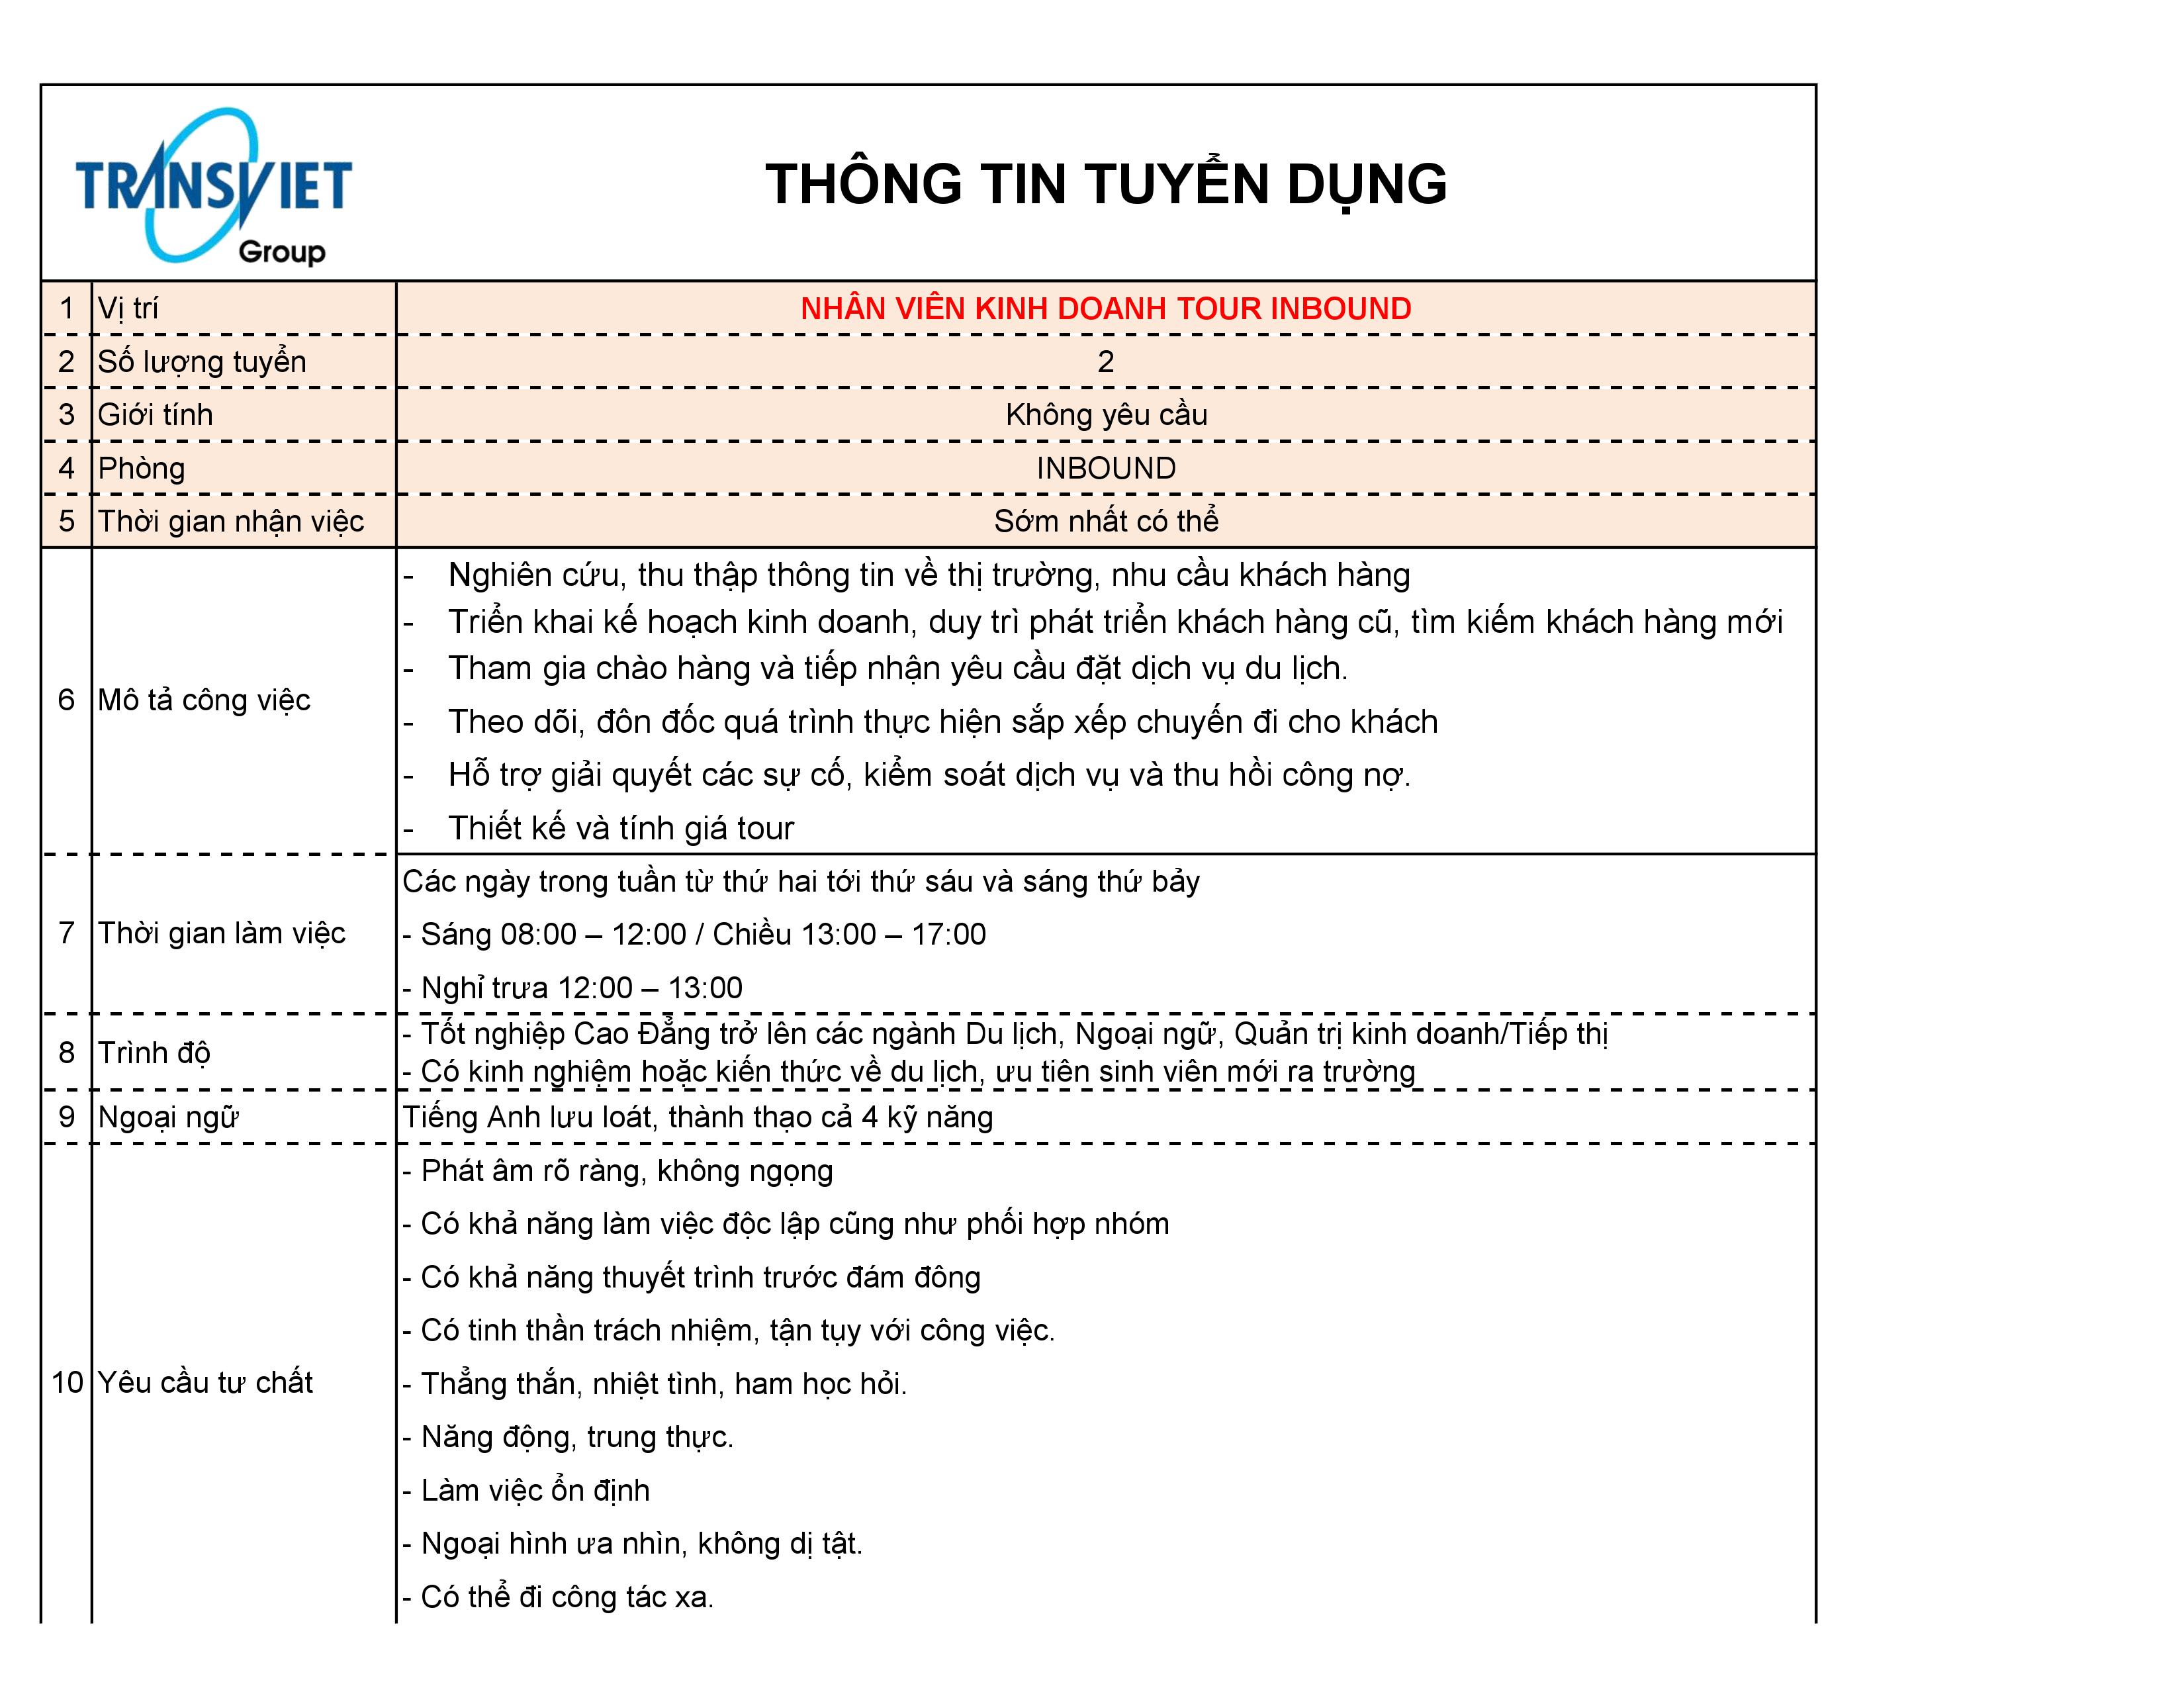 TRANSVIET GROUP TUYỂN DỤNG 2